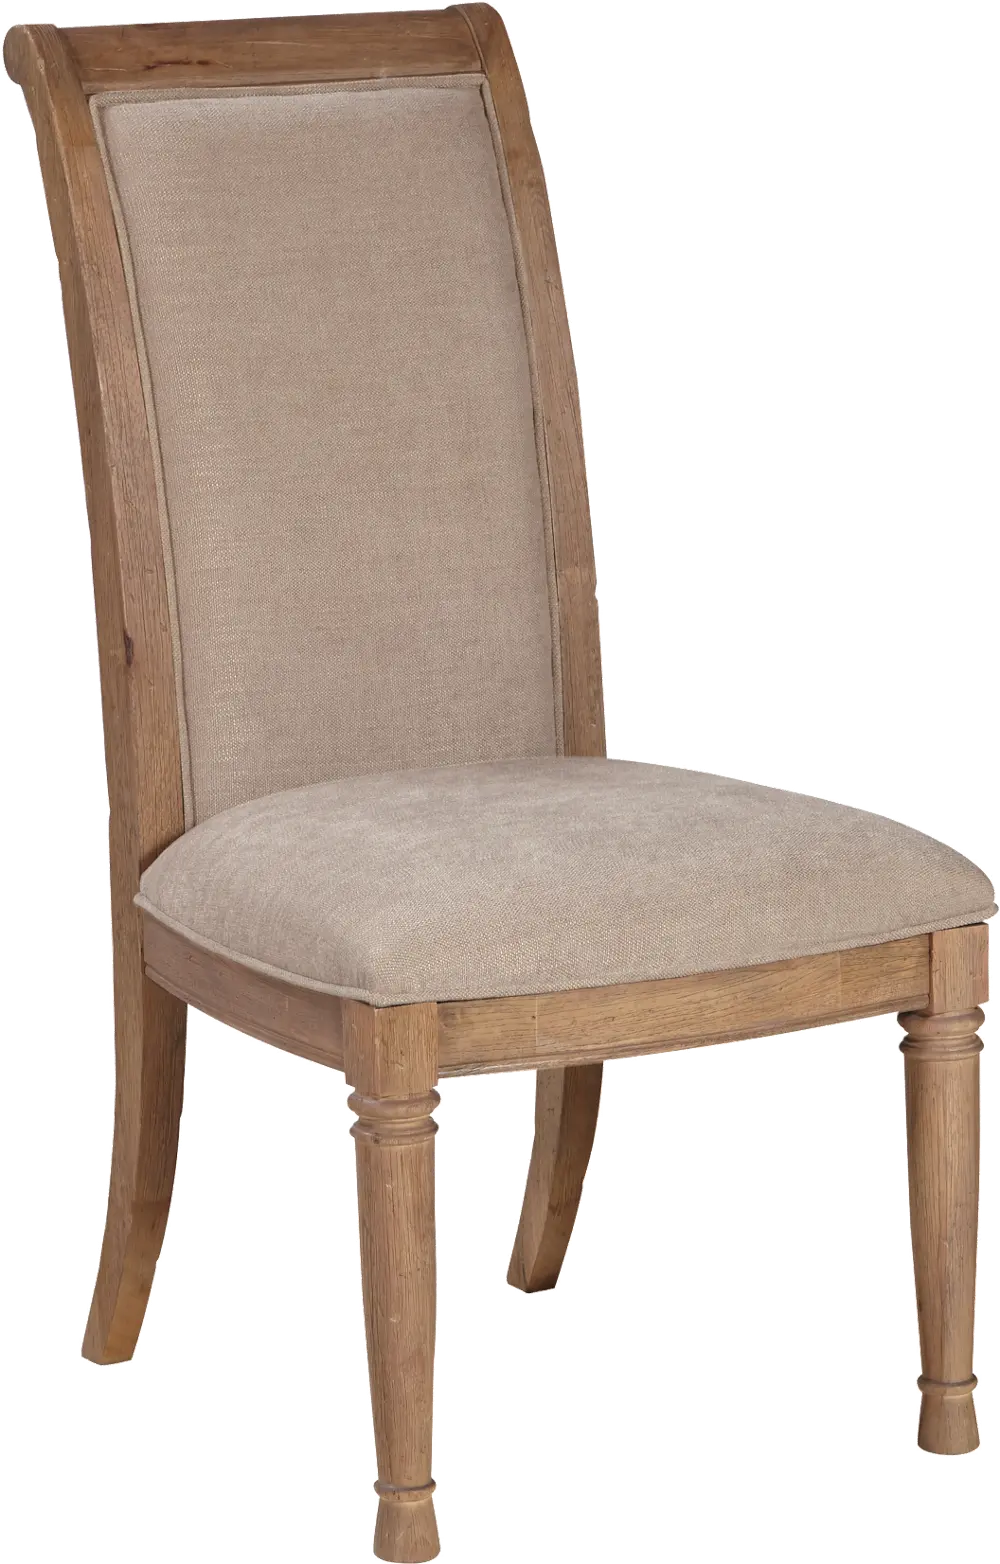 Rustic Oak Upholstered Dining Chair - Austin-1